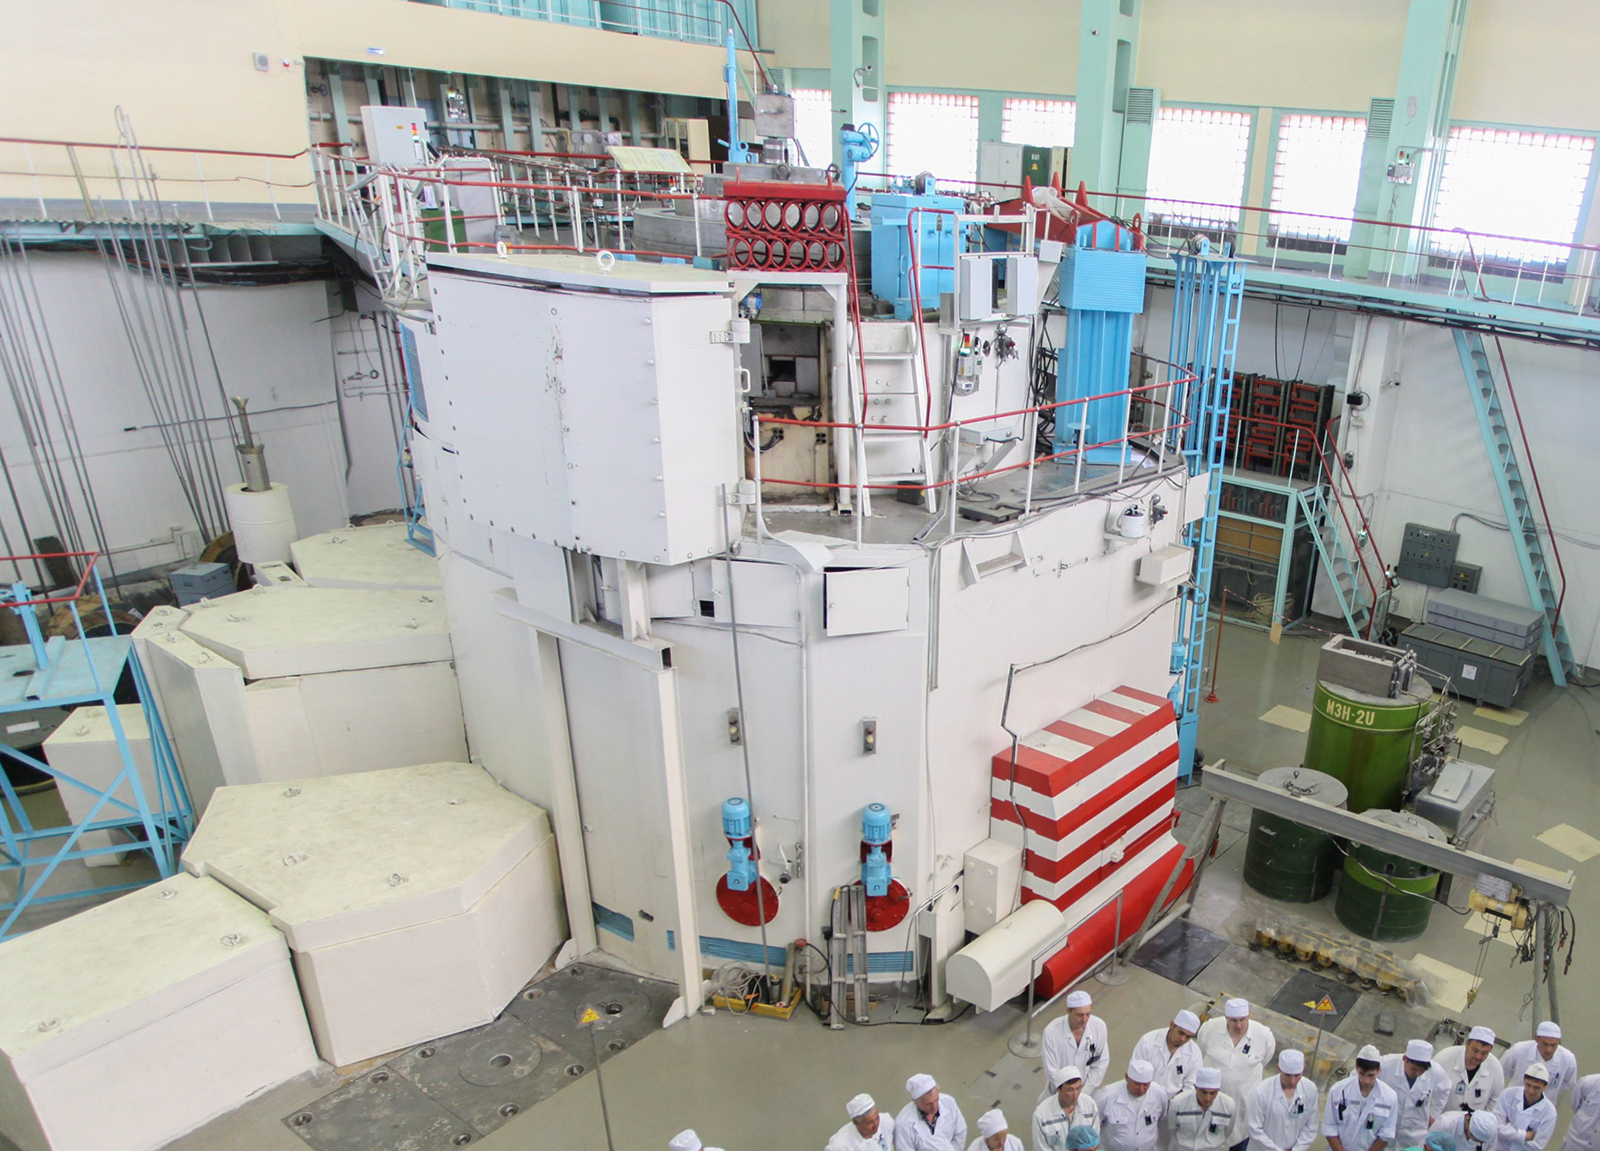 In Almaty, Kazakhstan, Argonne engineers worked with the Kazakh Institute of Nuclear Physics on a decade-long conversion of the VVR-K reactor.